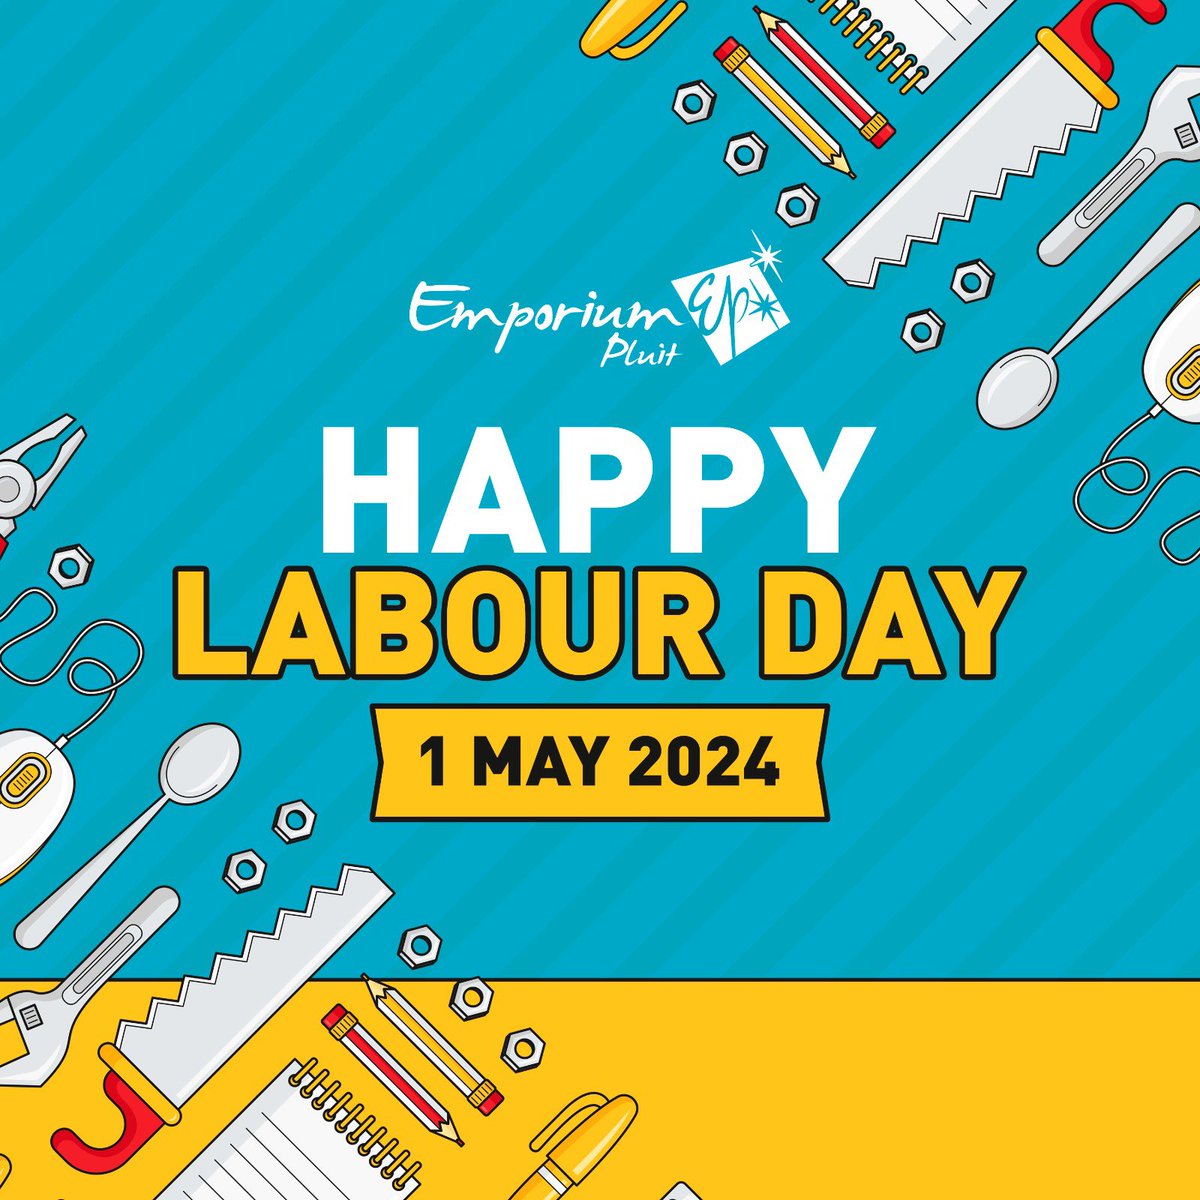 Here’s to celebrating the hard work and achievements of workers around the world. Take a moment to appreciate your accomplishments and recharge for new challenges. Happy Labour Day!